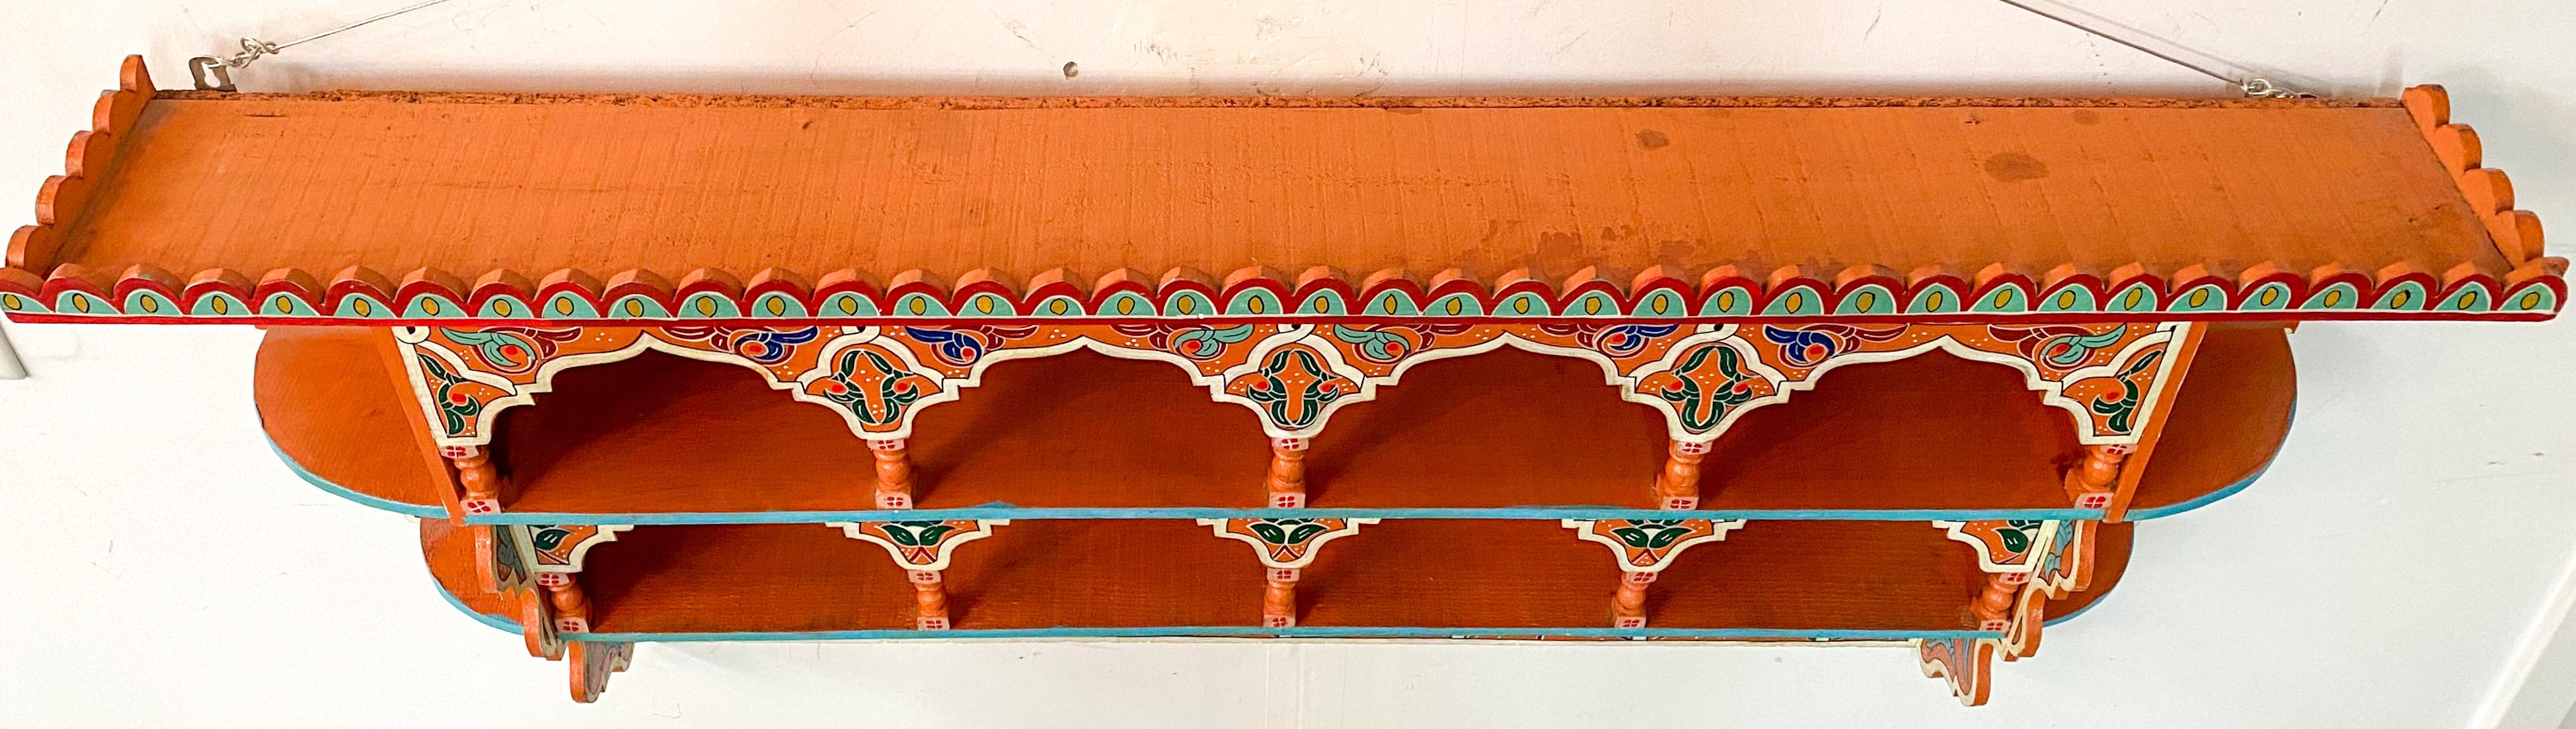 Vintage Moroccan Hand Painted Wall Shelf or Spice Rack For Sale 4